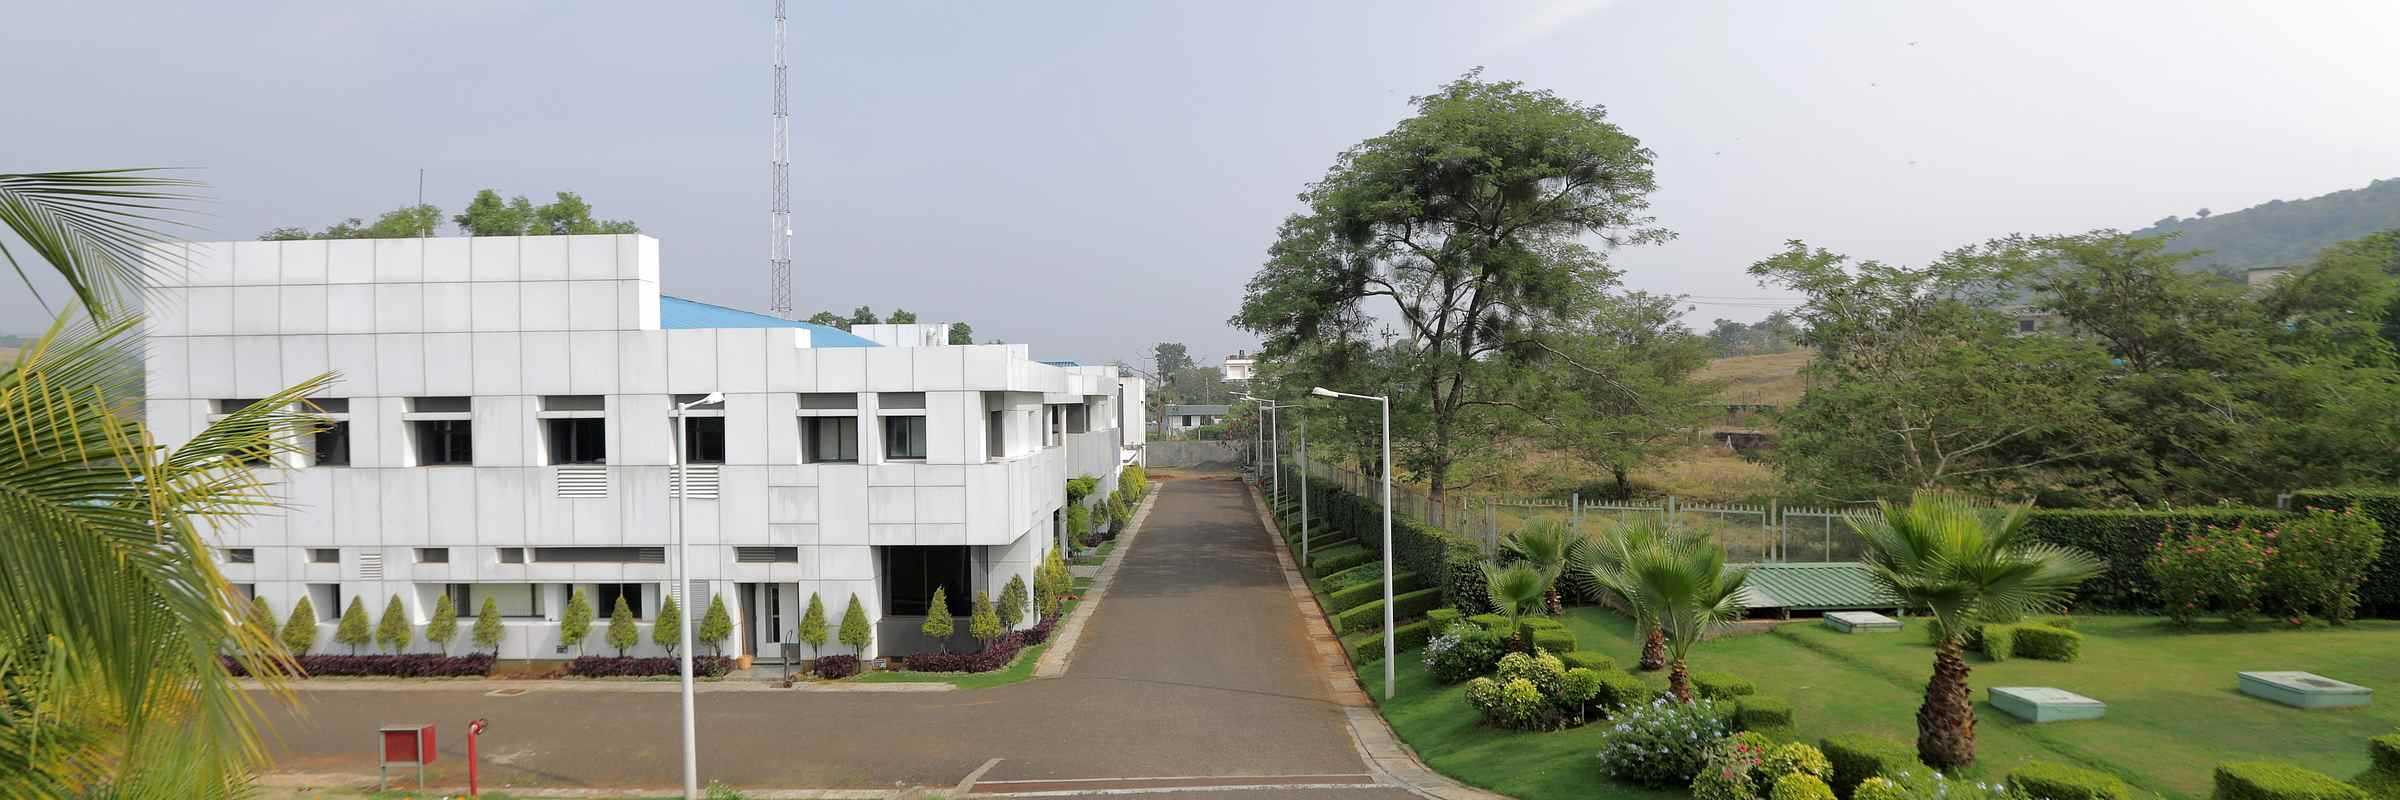 Sudarshan's state-of-the-art R & D Center at Sutarwadi